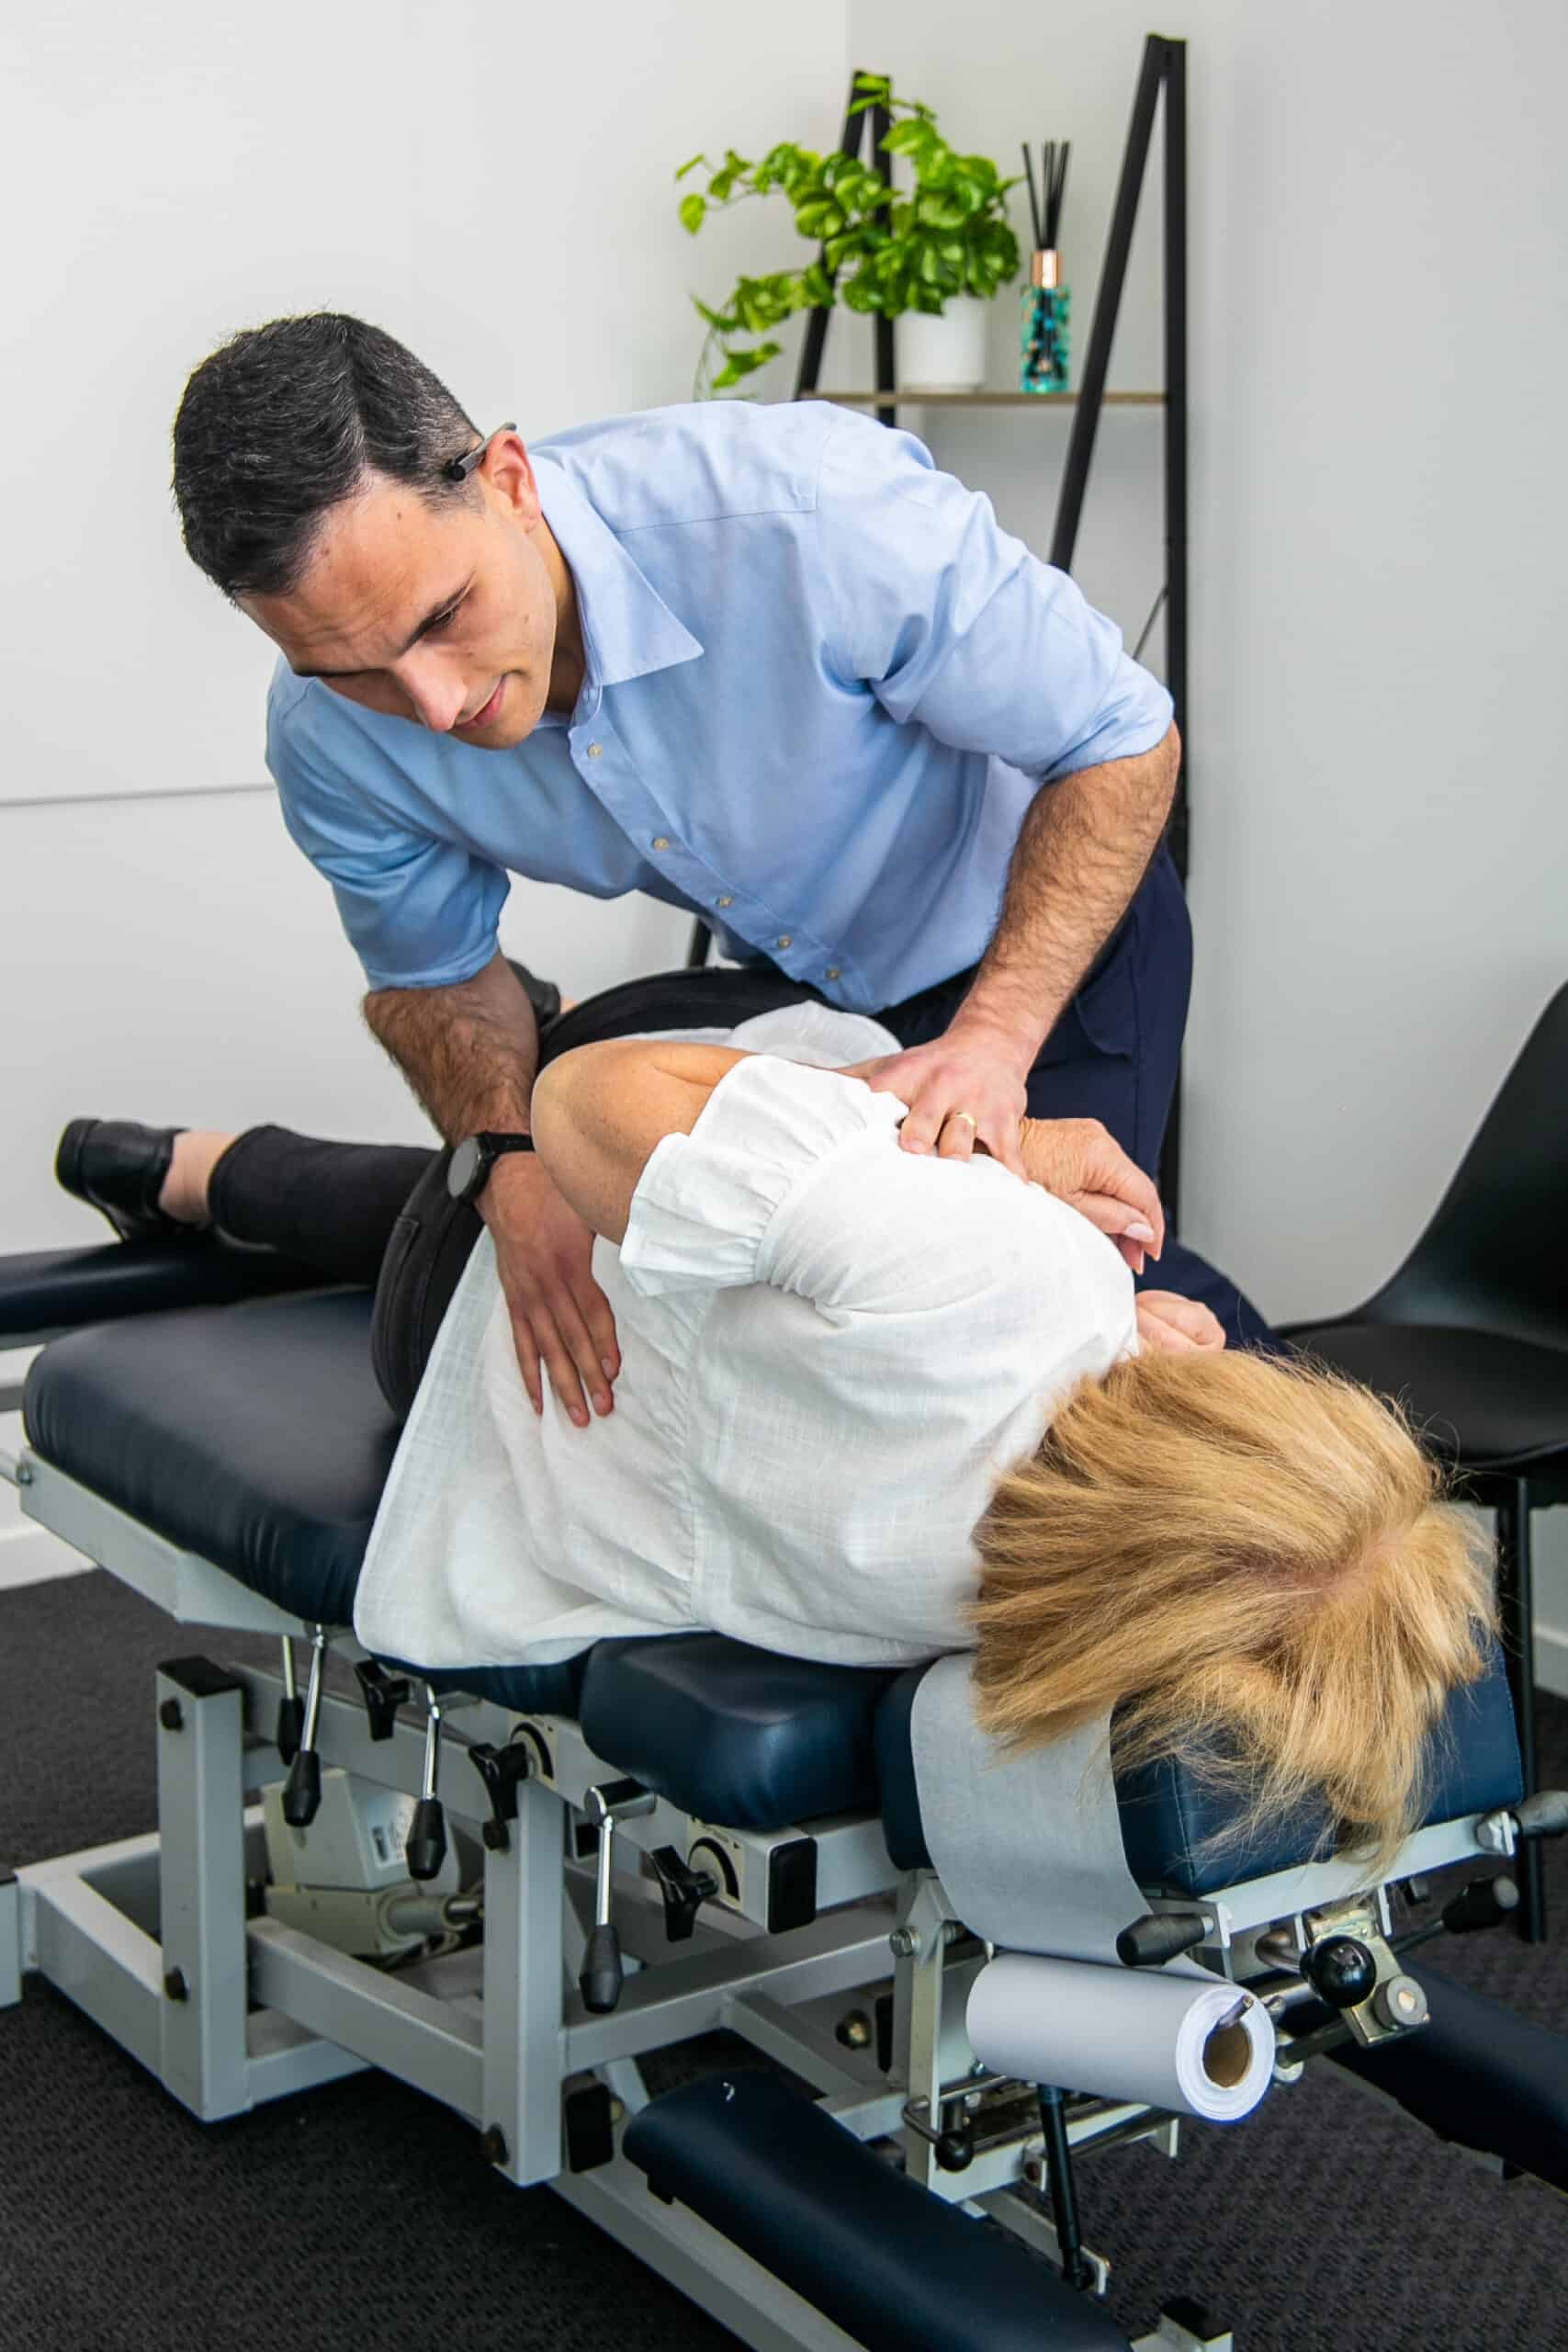 Male Geelong chiropractor performing manual chiropractic adjustment to female client for lower back pain